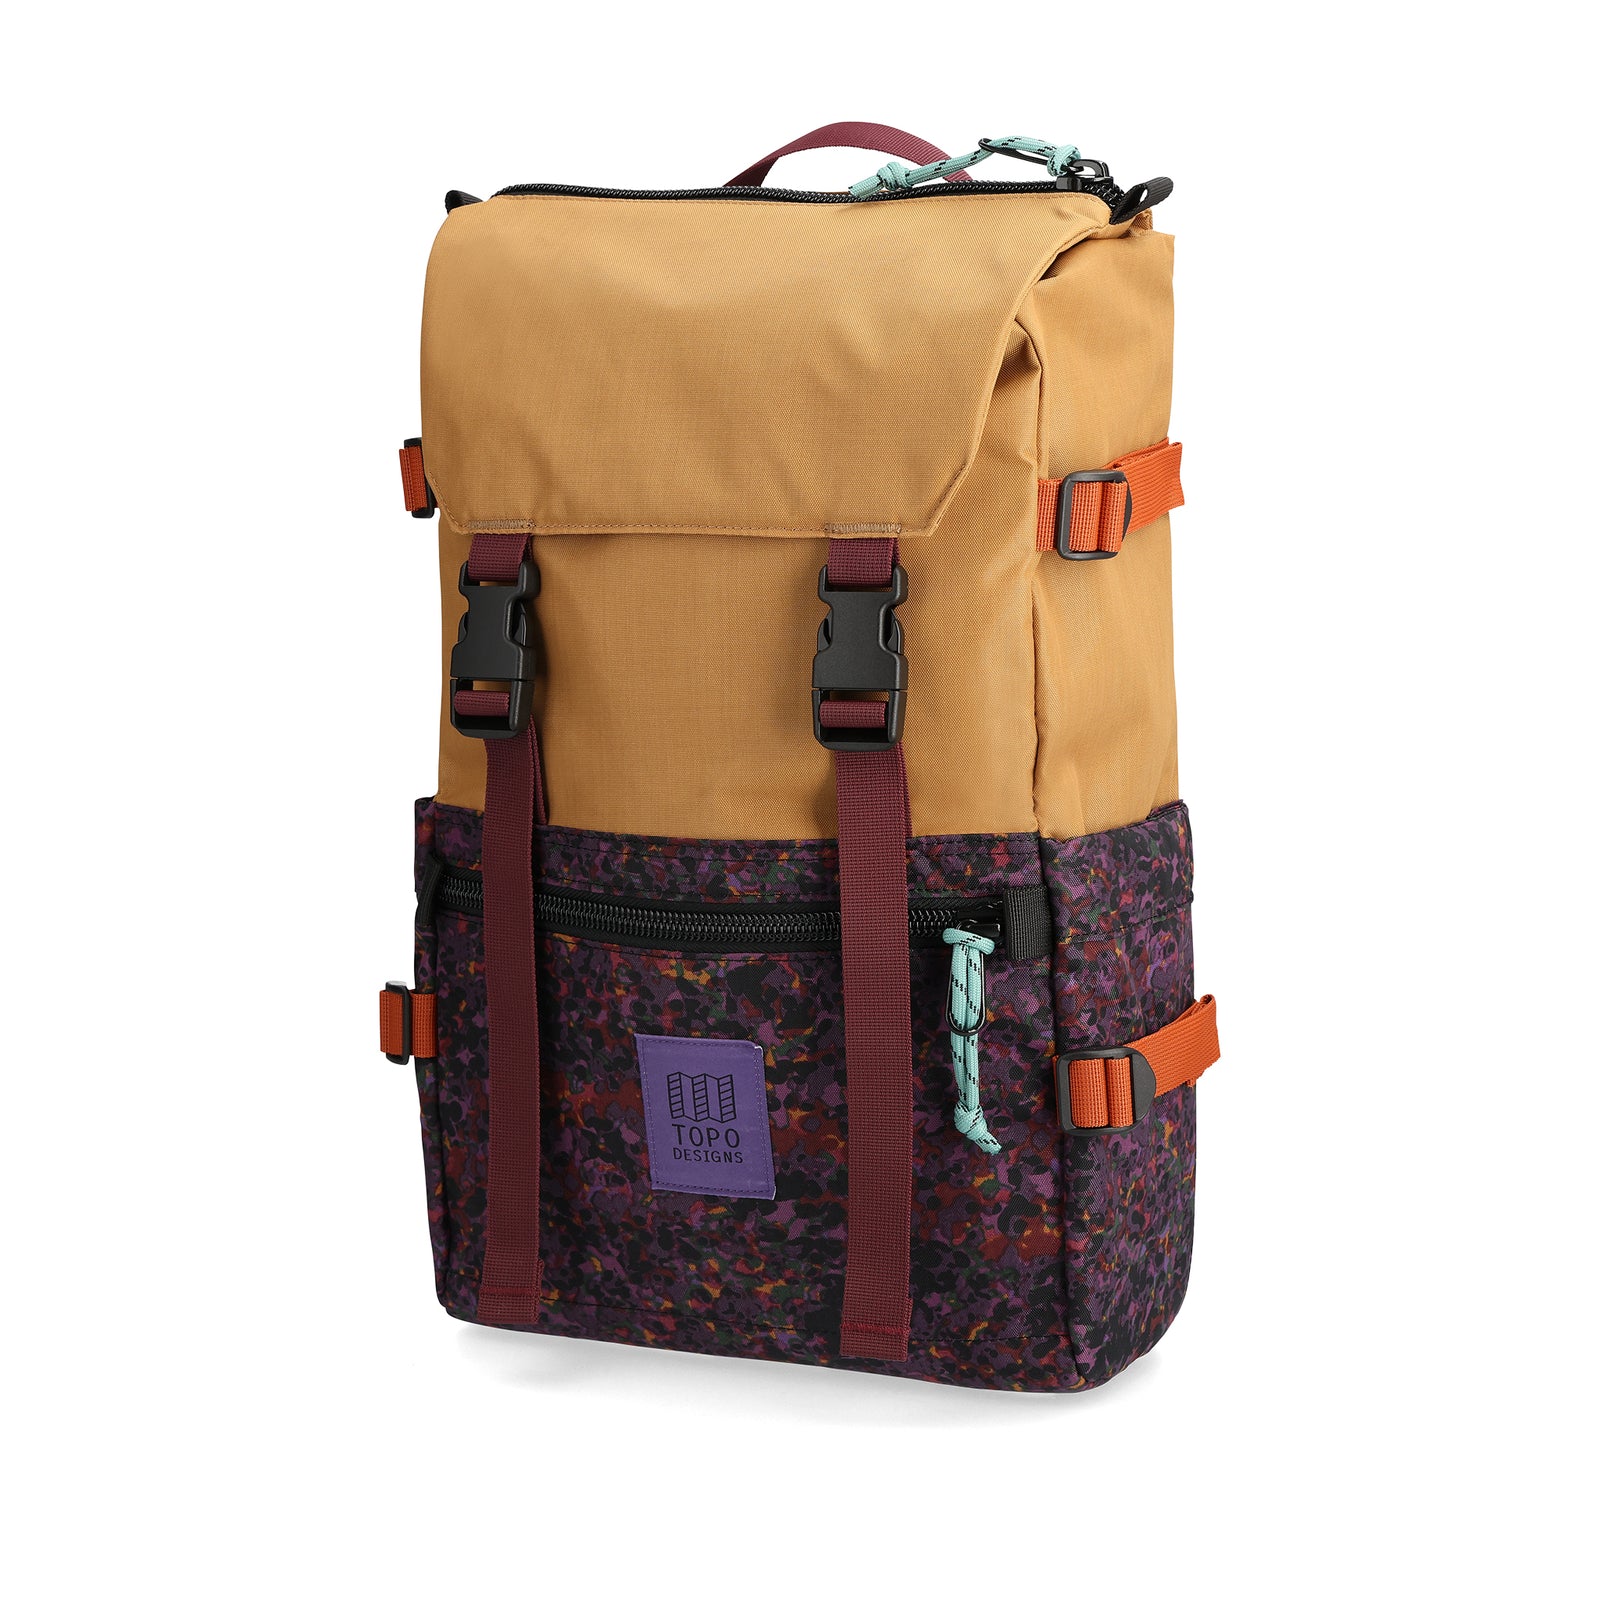 Front View of Topo Designs Rover Pack Classic in "Khaki / Black Meteor"